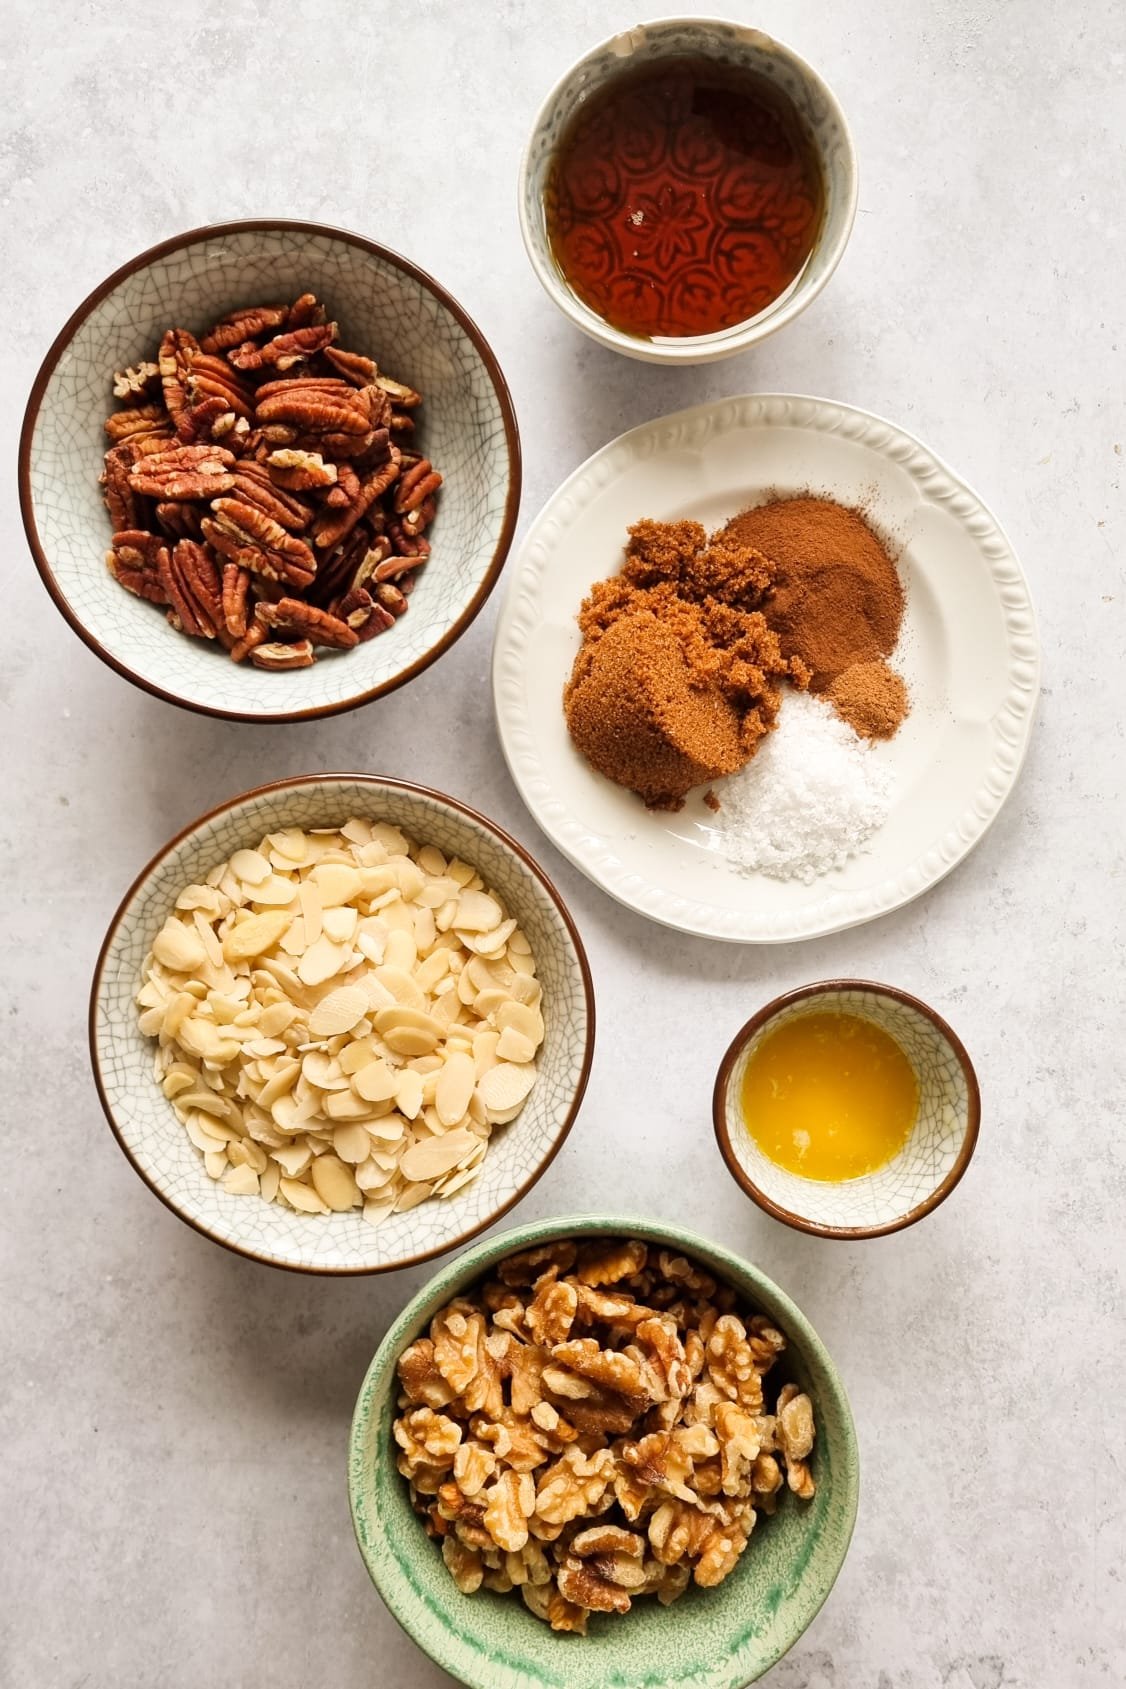 All the ingredients of the Sweet Candied Nuts are well prepared each in its own bowl or plate.